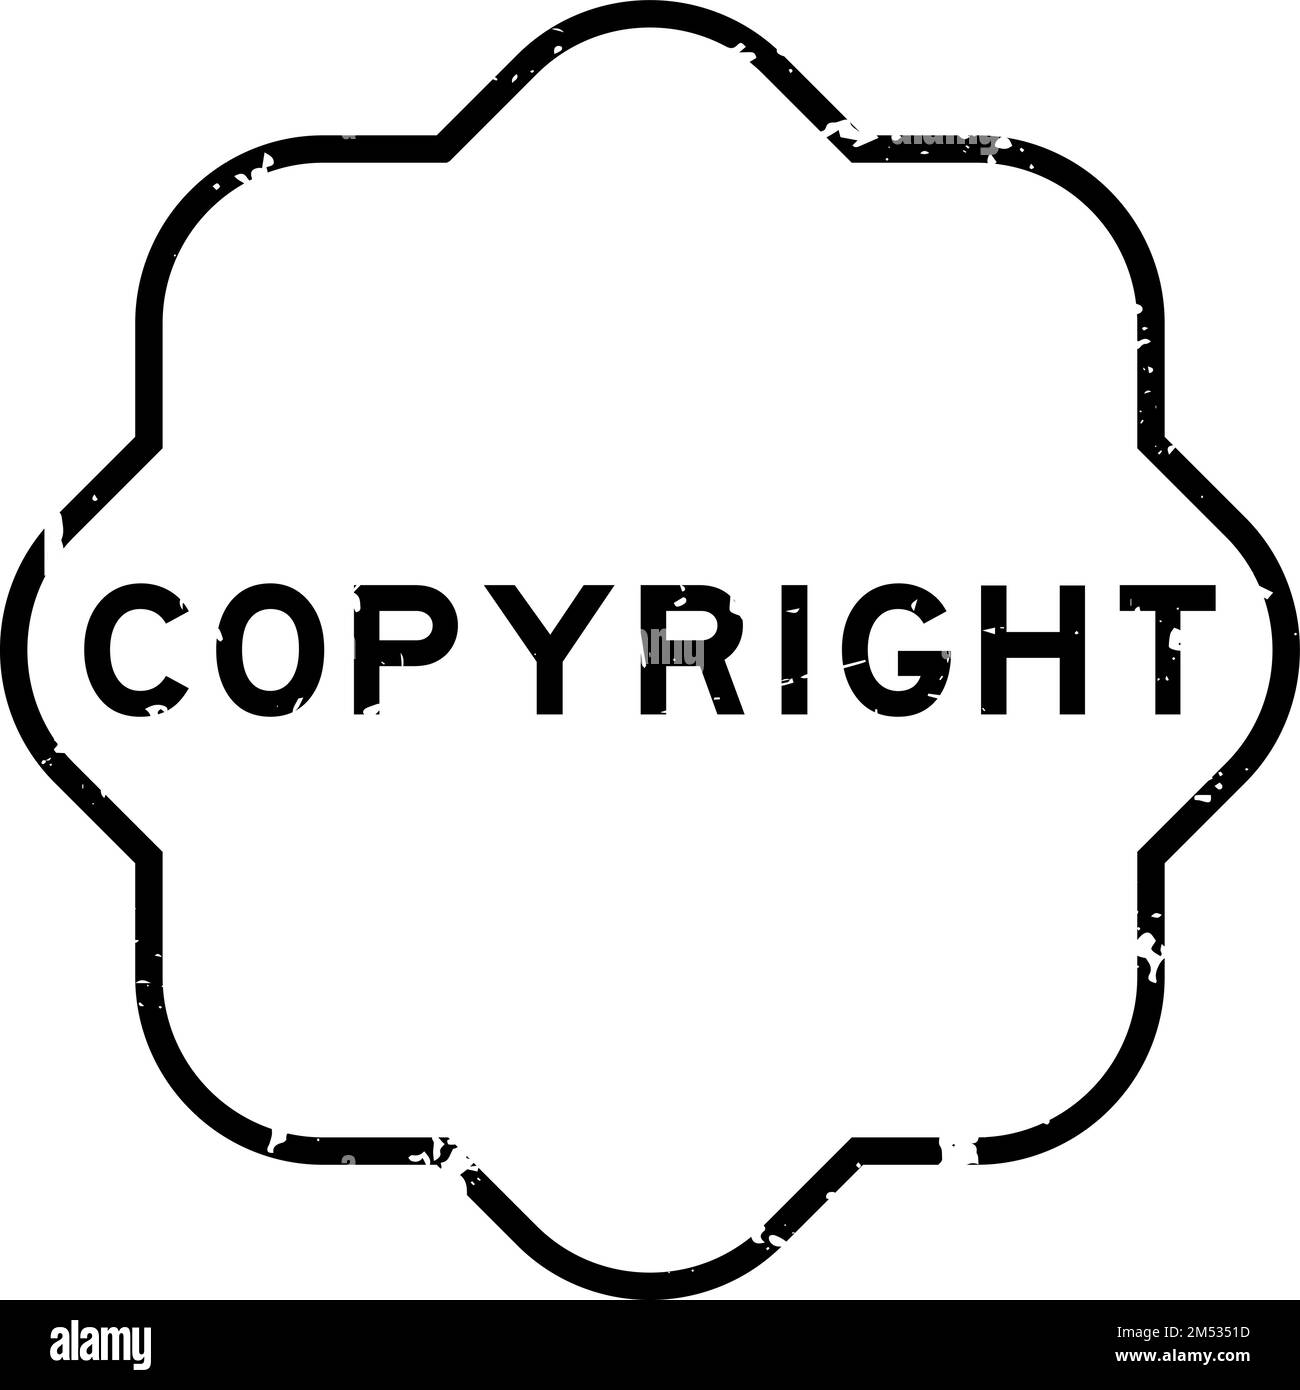 Grunge black copyright word rubber seal stamp on white background Stock Vector